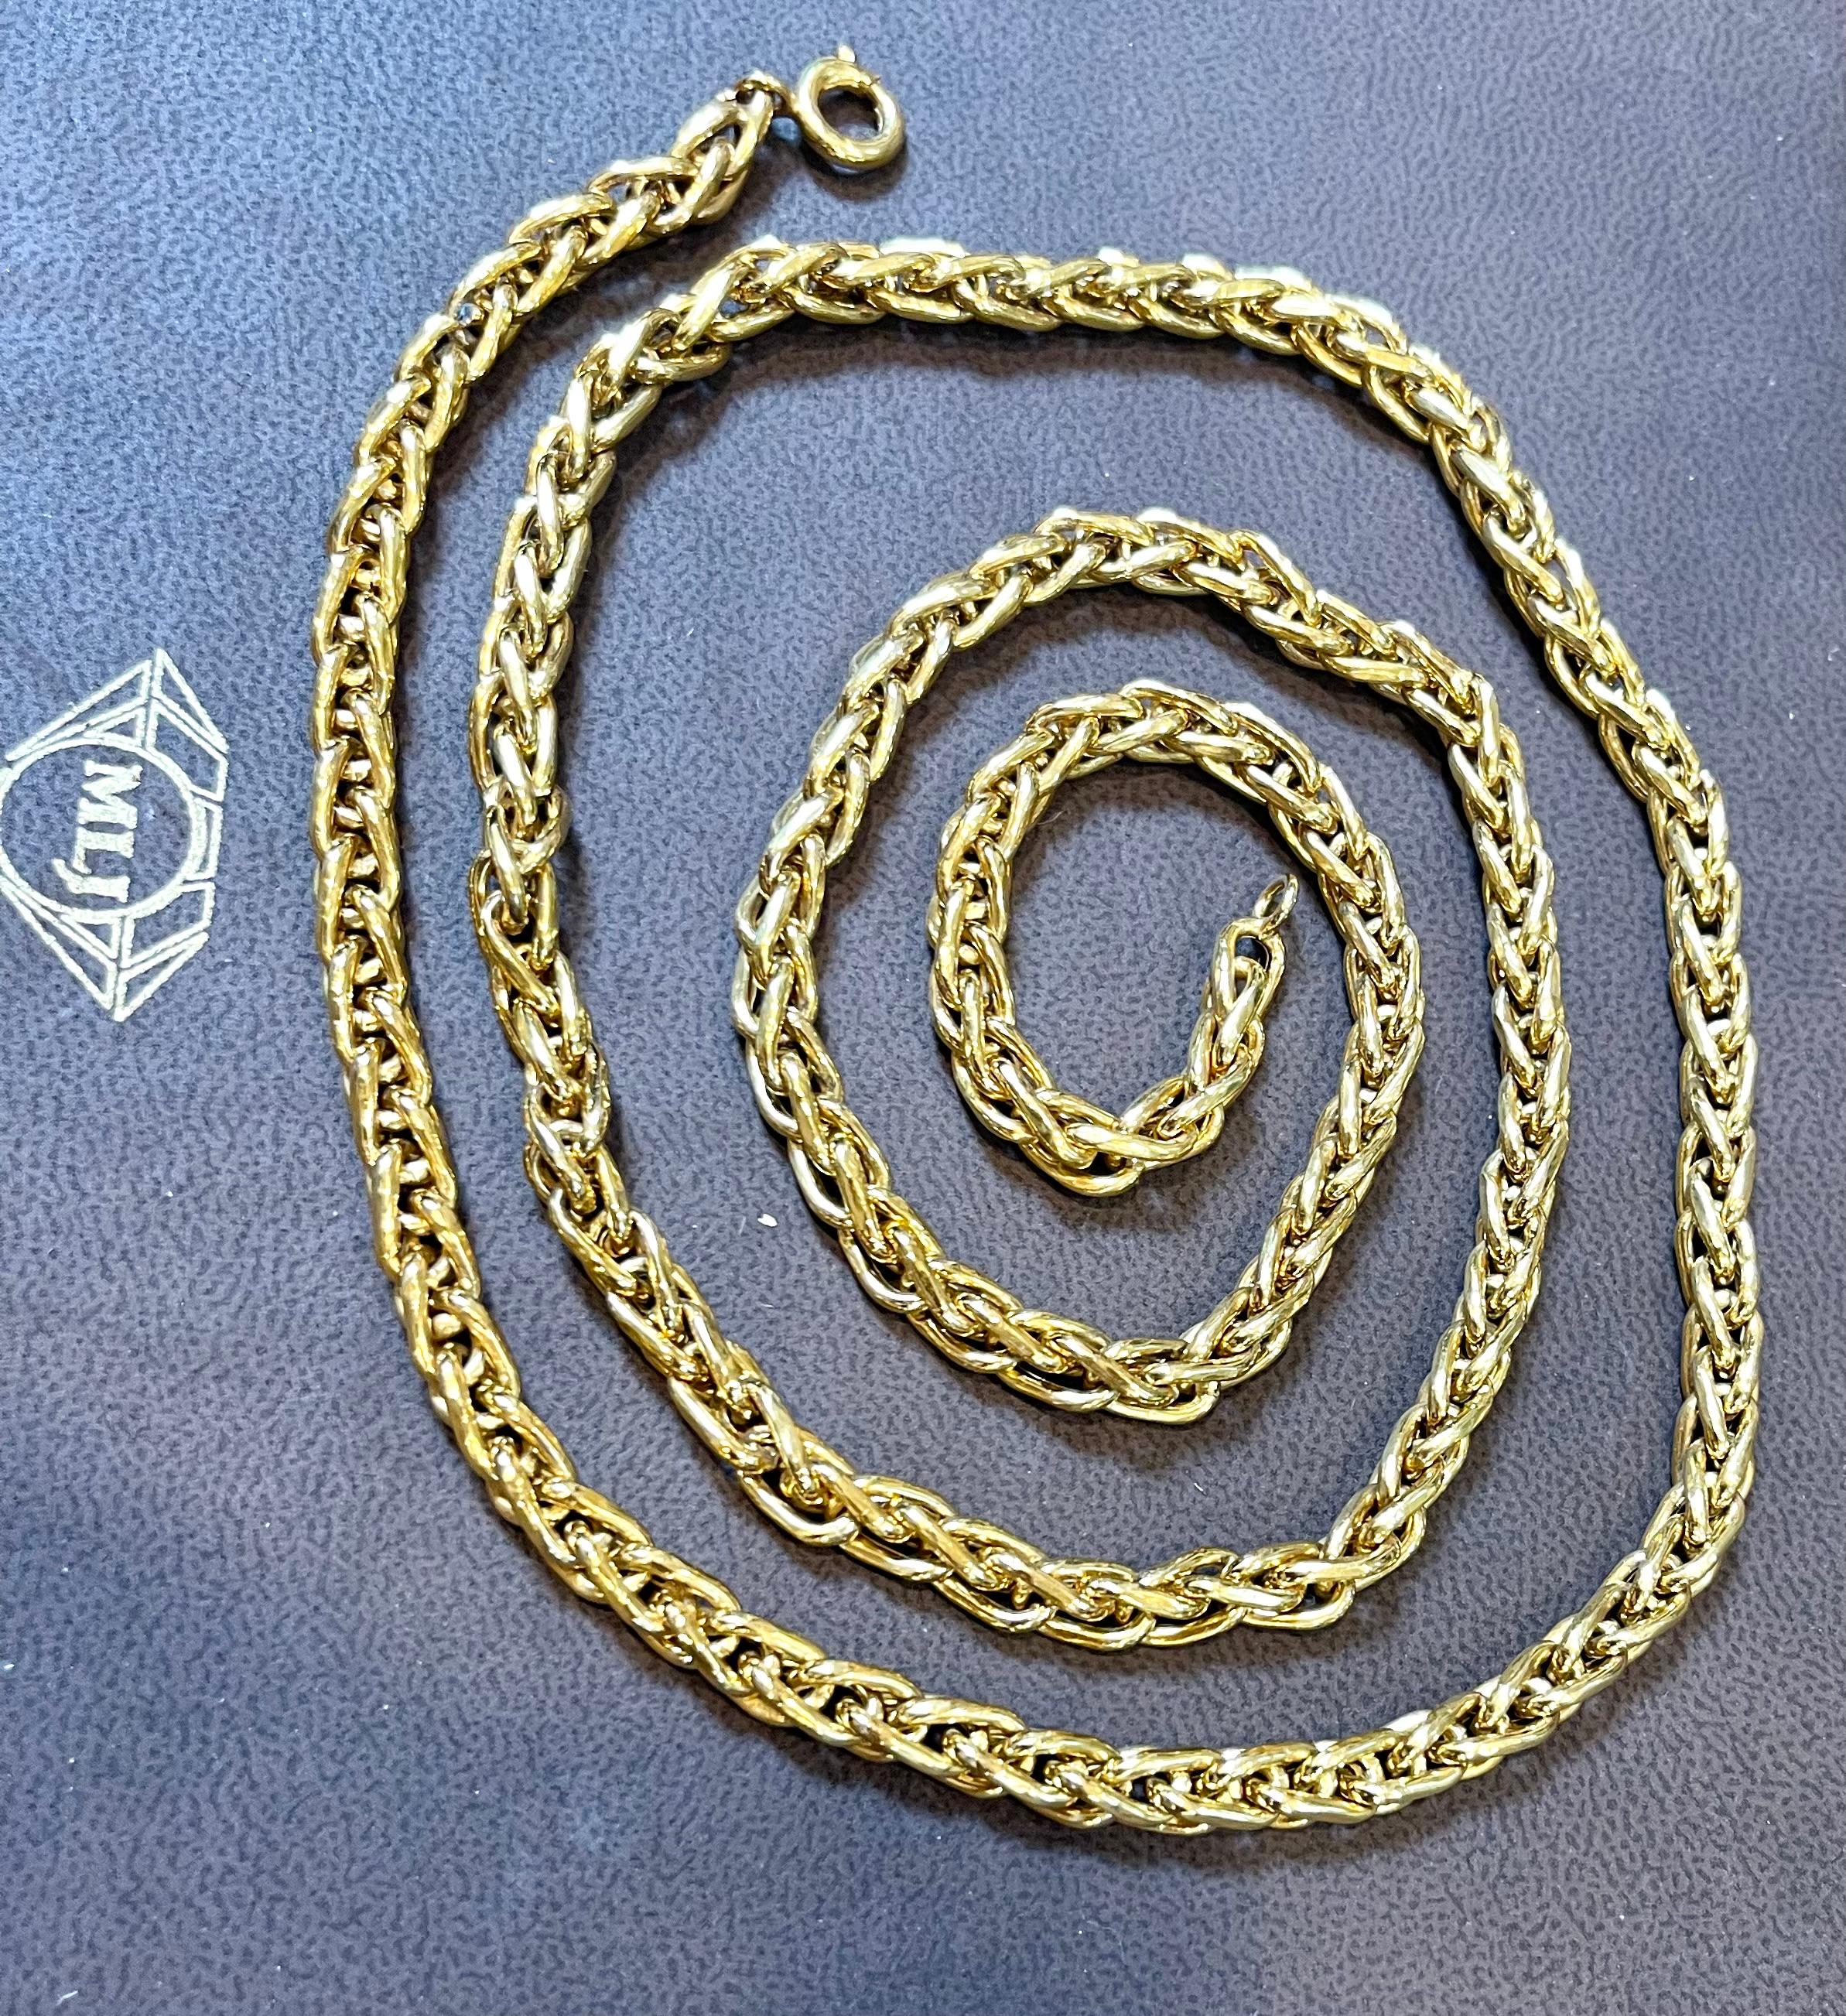 Vintage 14 Karat Yellow Gold 70 Gm, Wheat Chain Necklace Opera Length 34 Inch
6 MM wide
34 